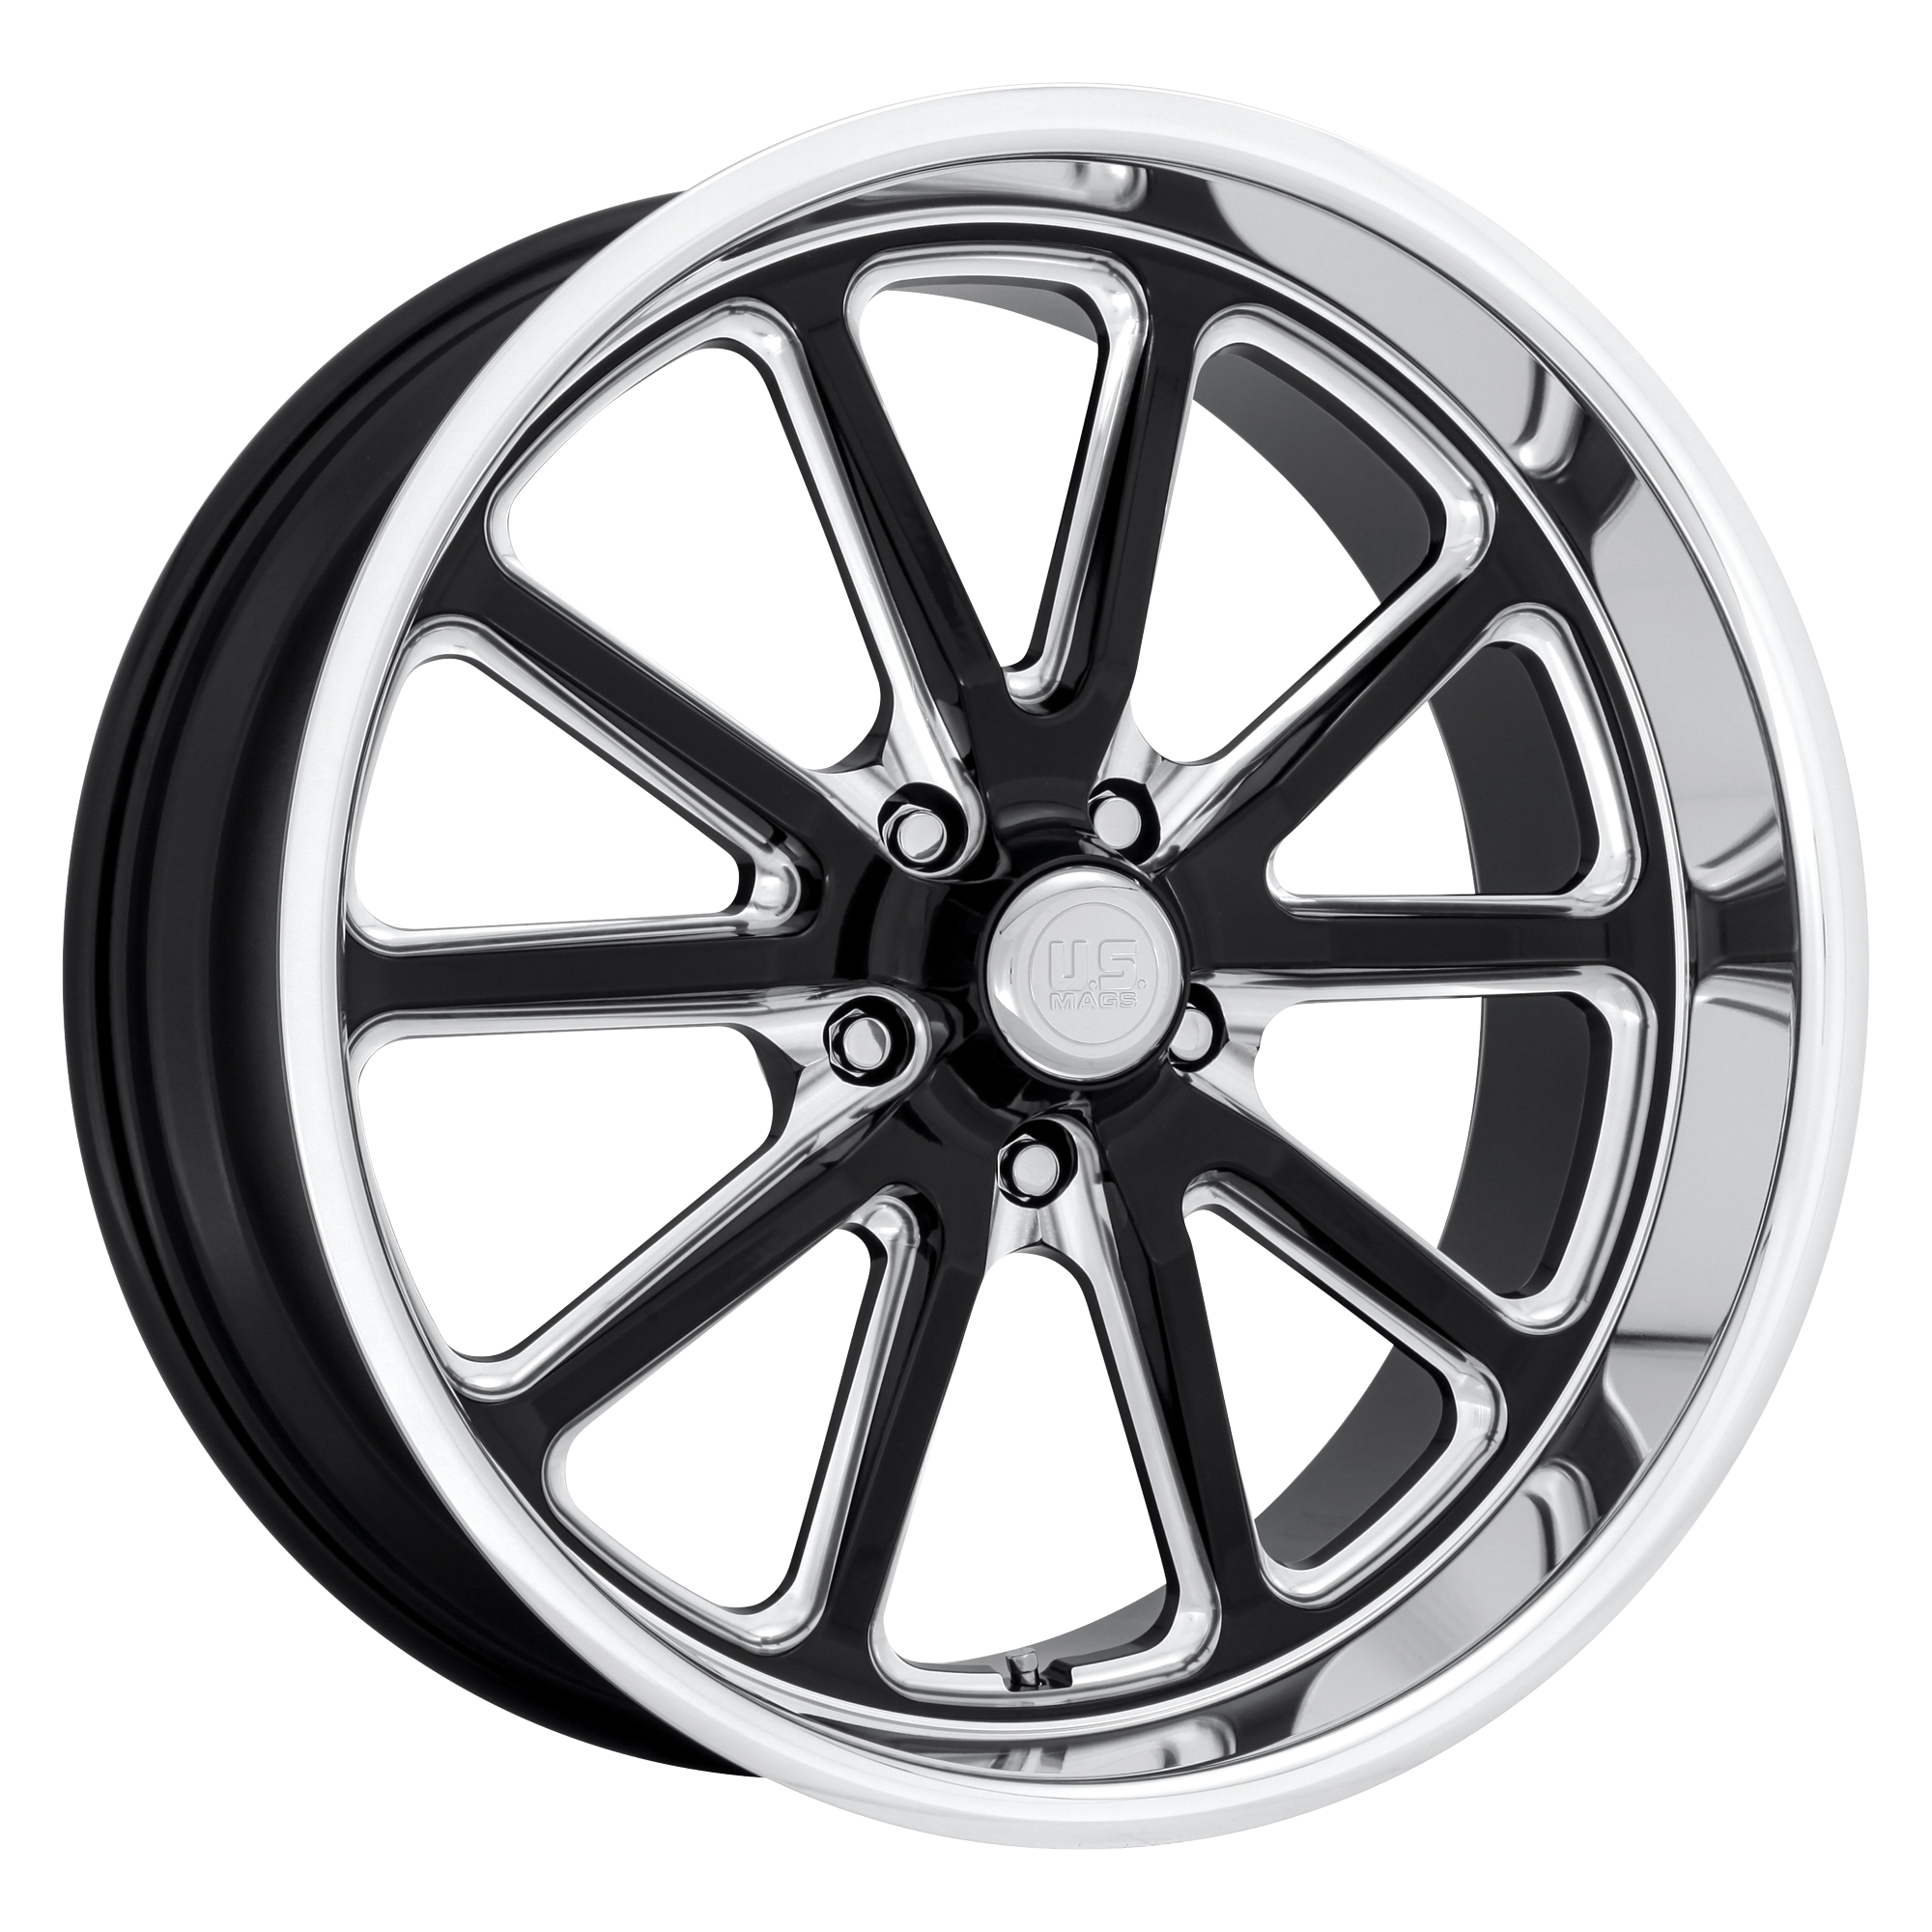 RAMBLER 17x8 5x120.65 GLOSS BLACK MILLED (1 mm) - Tires and Engine Performance